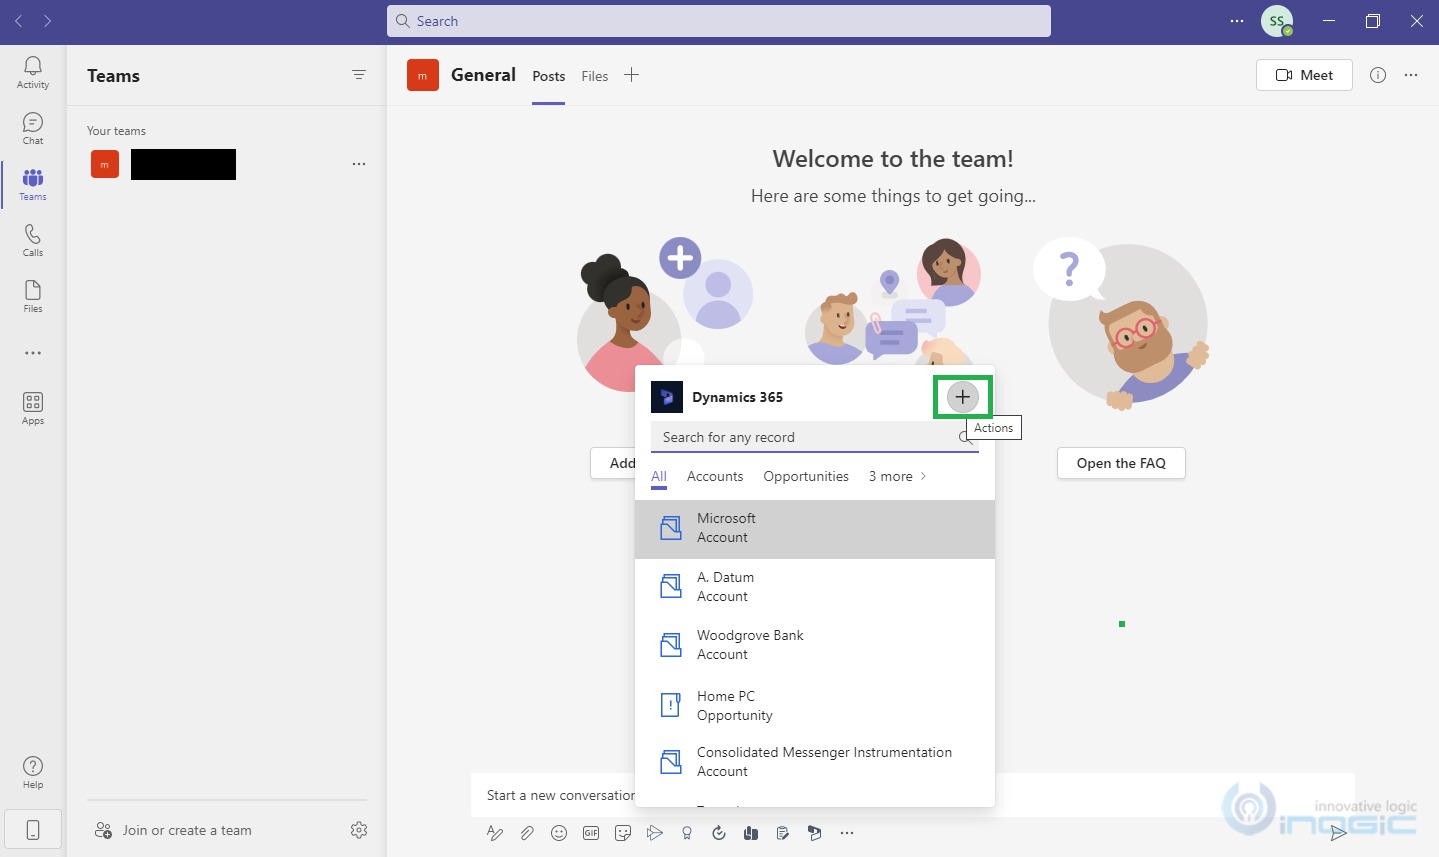 Sharing of Dynamics Records through search in Microsoft Teams